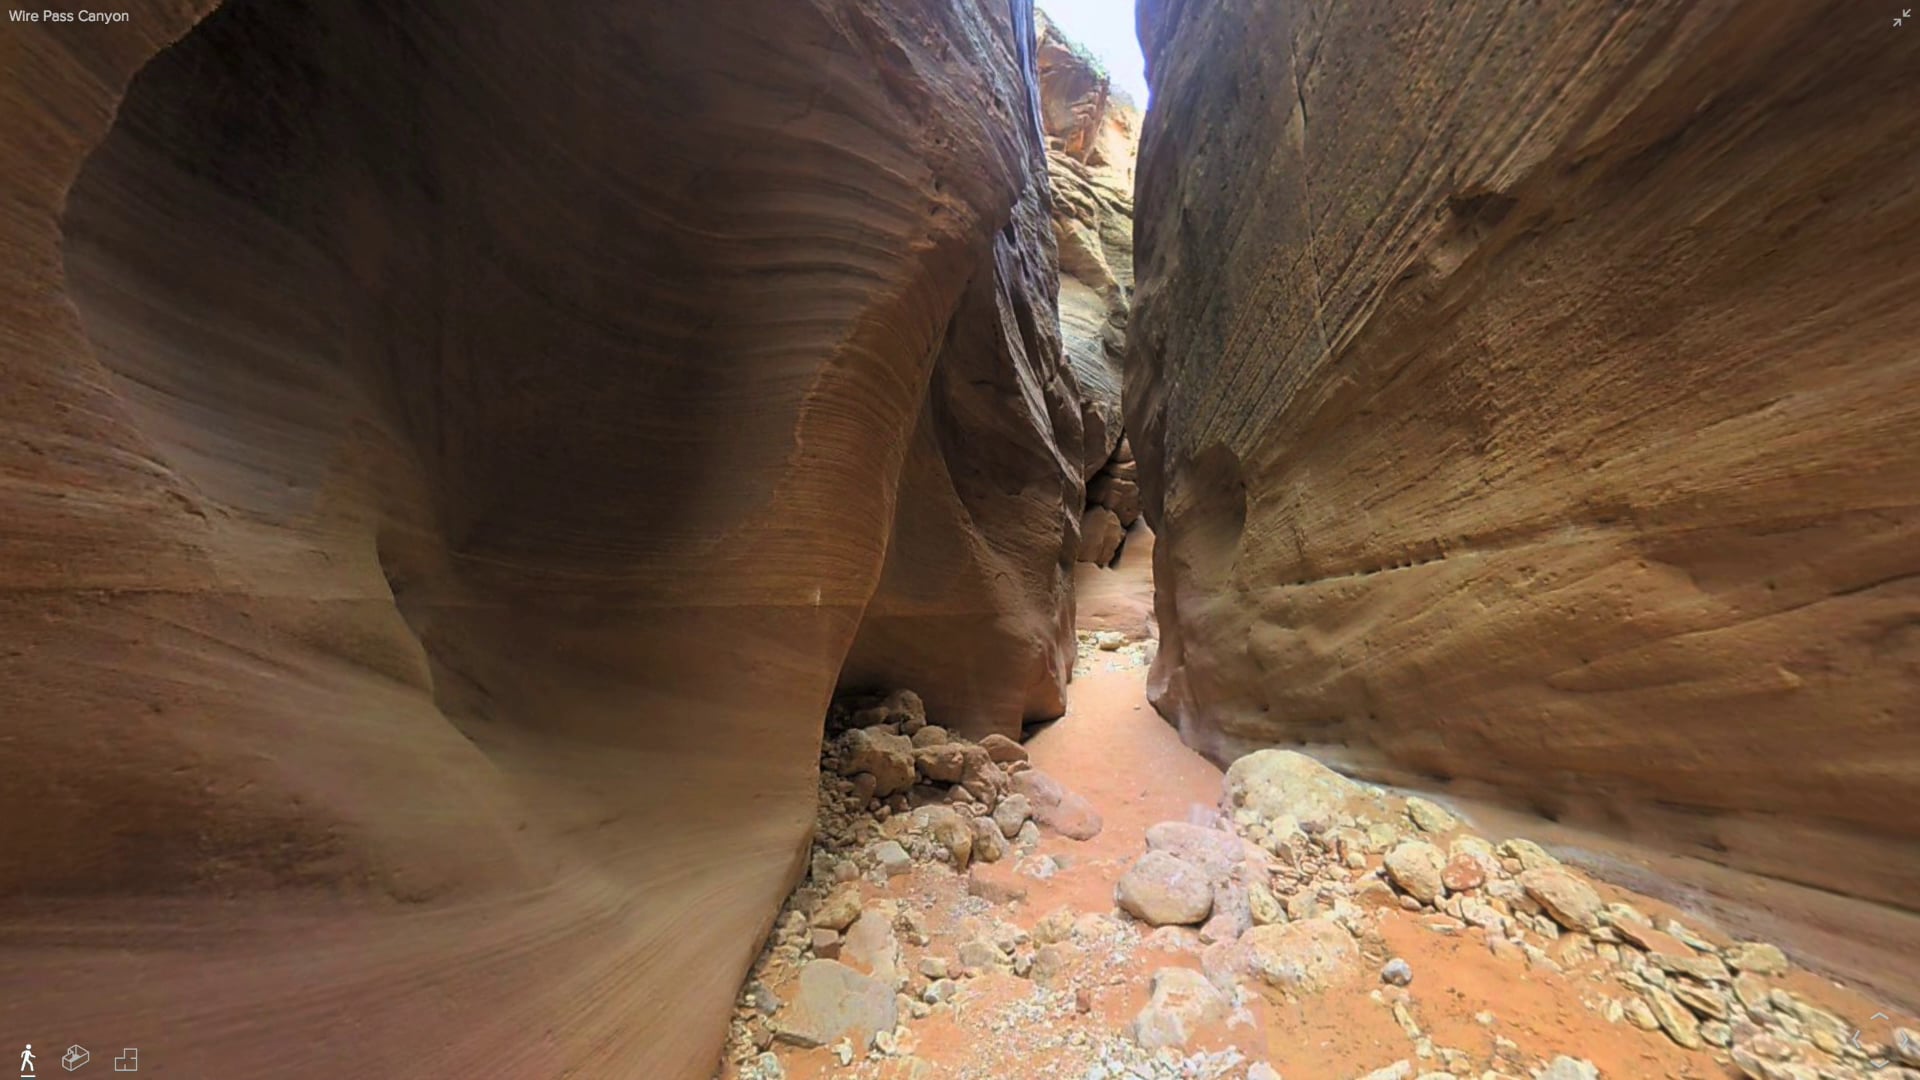 Video Example of Matterport 3D Showcase: Wire Pass Canyon